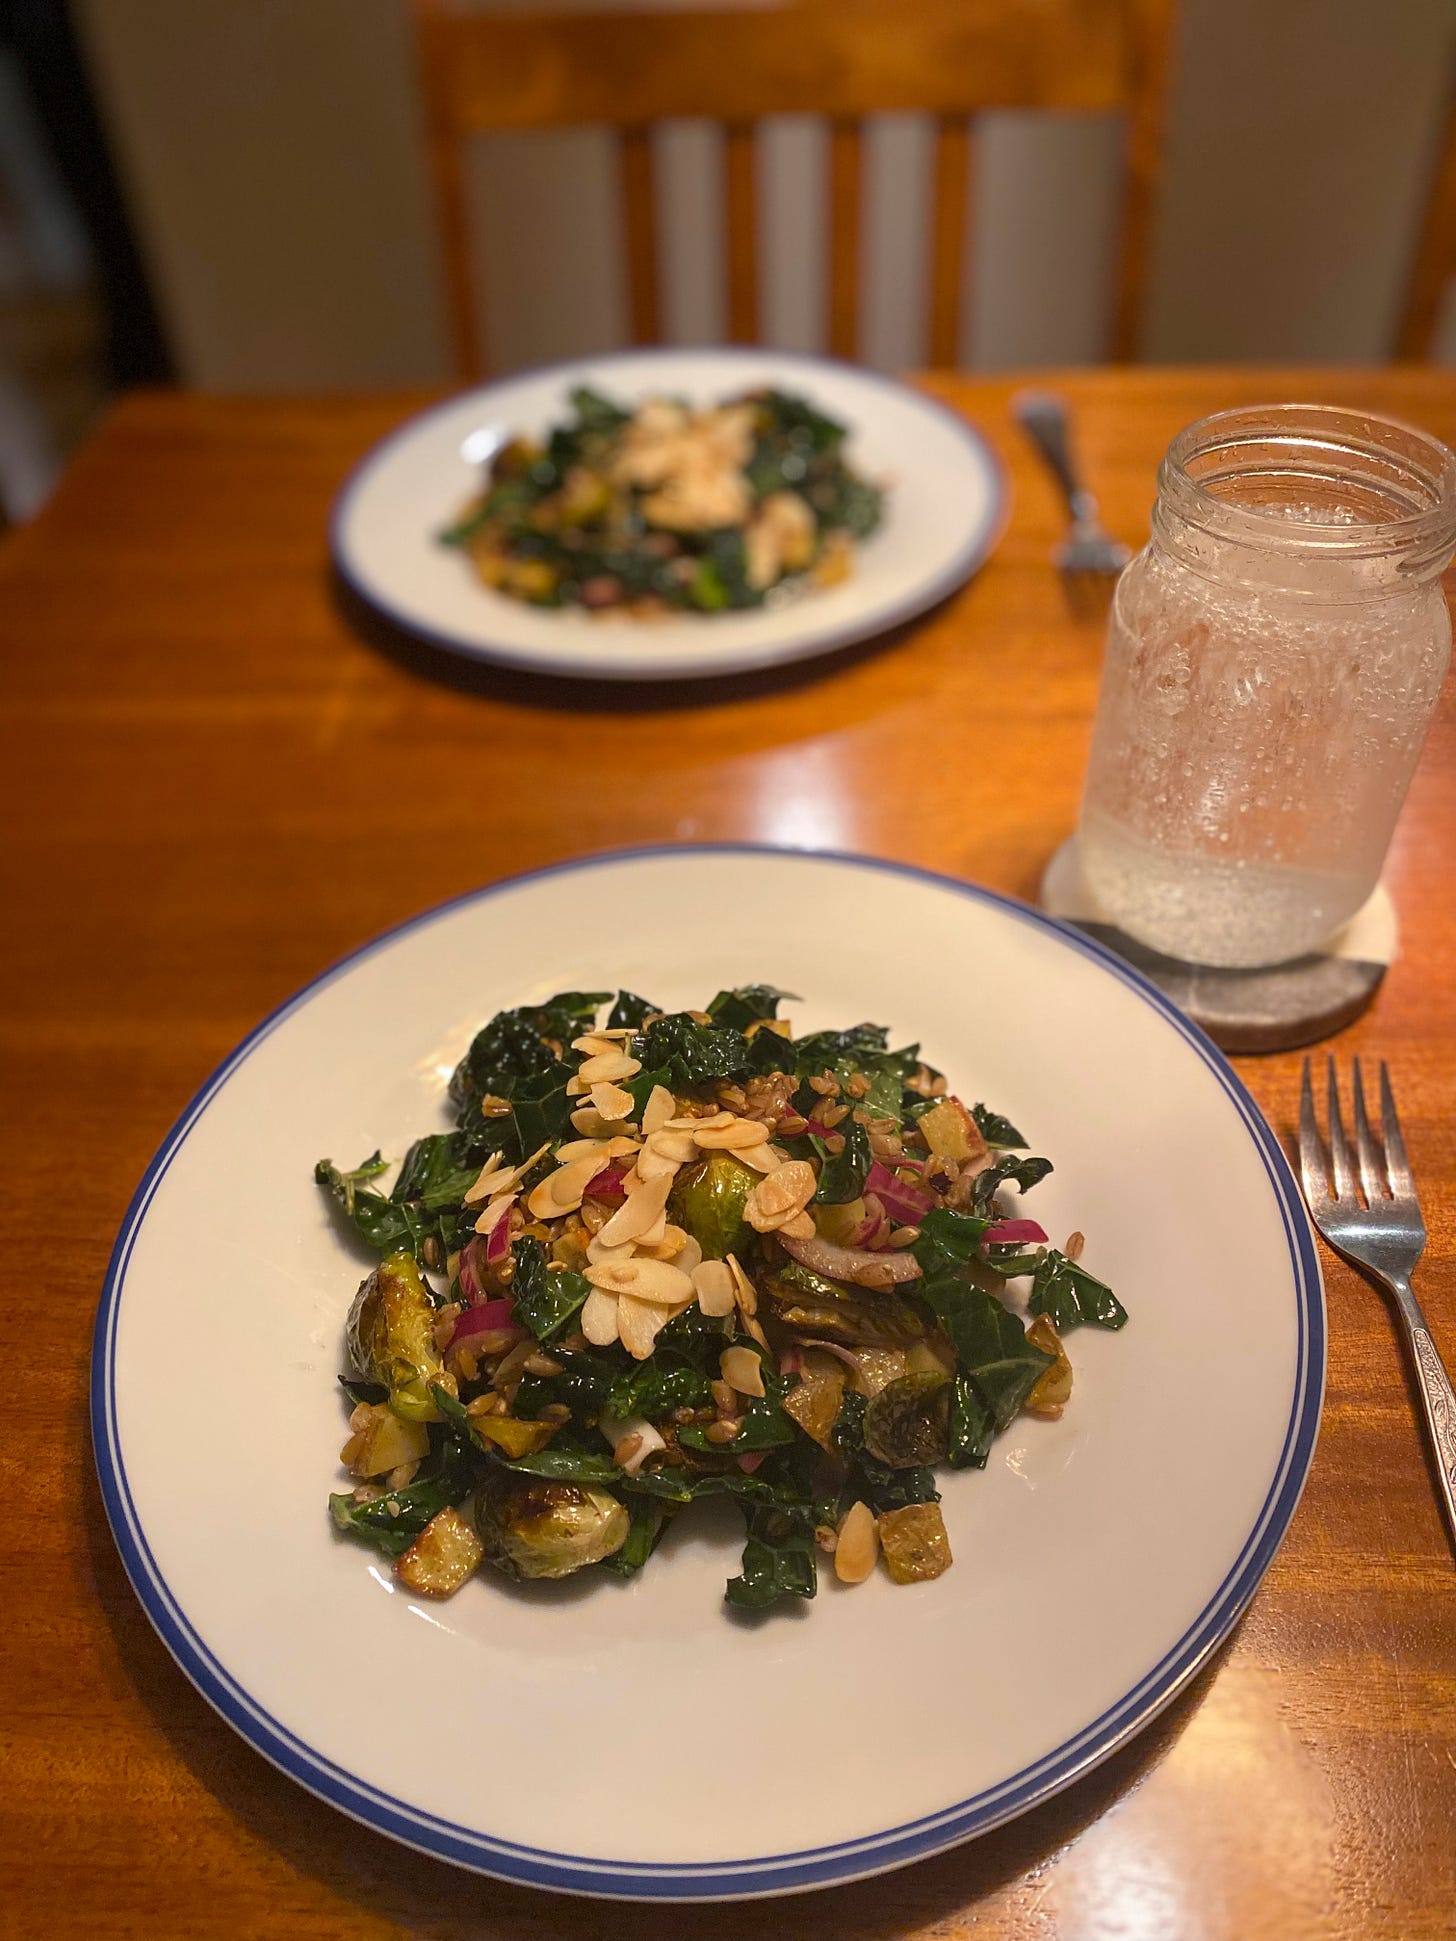 Two large plates of the salad described above, with toasted nuts and pickled red onion on top. A glass of sparkling water rests on a coaster above the plate in the foreground.